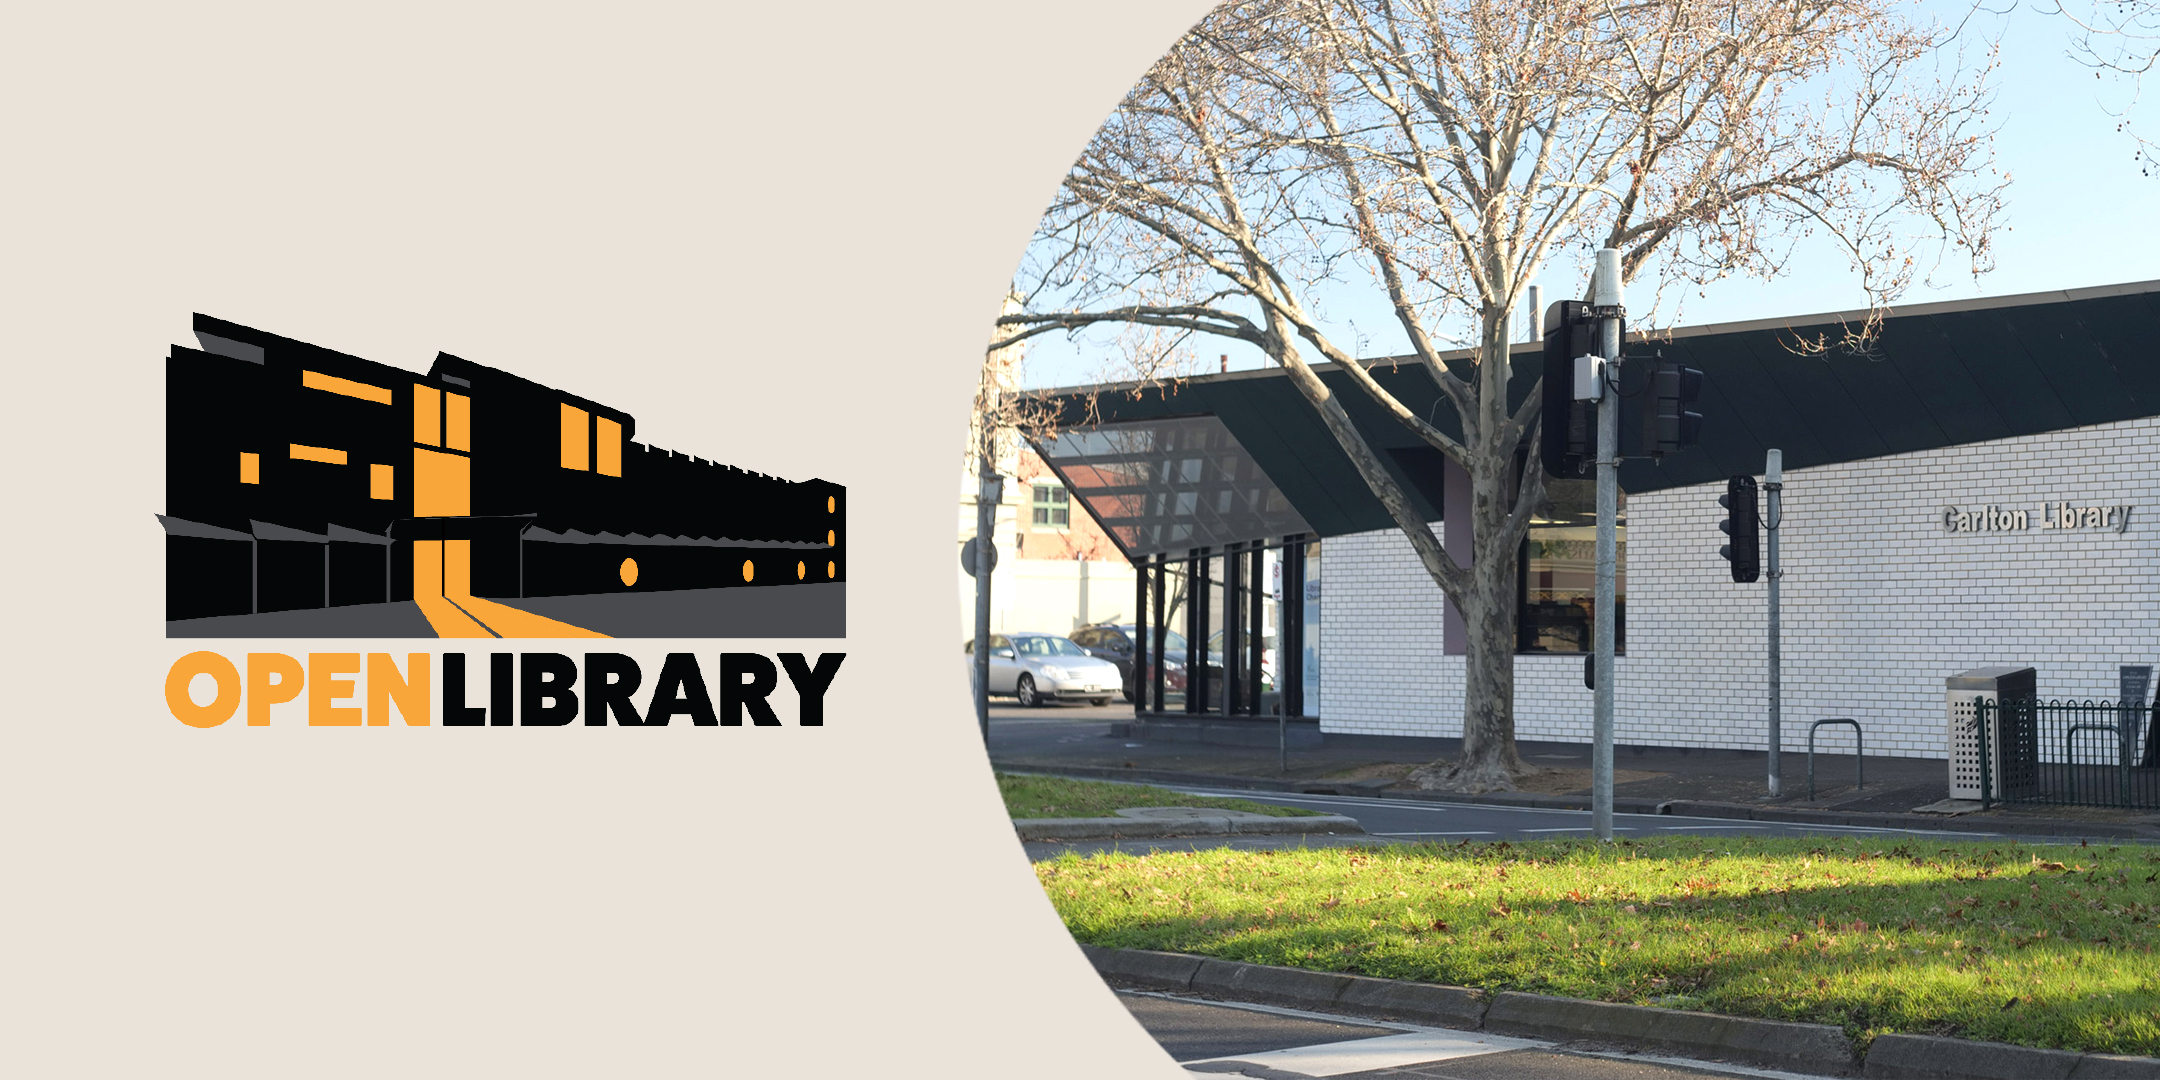 The Open Library logo is on the left hand side, with the exterior of Carlton Library on the right. 